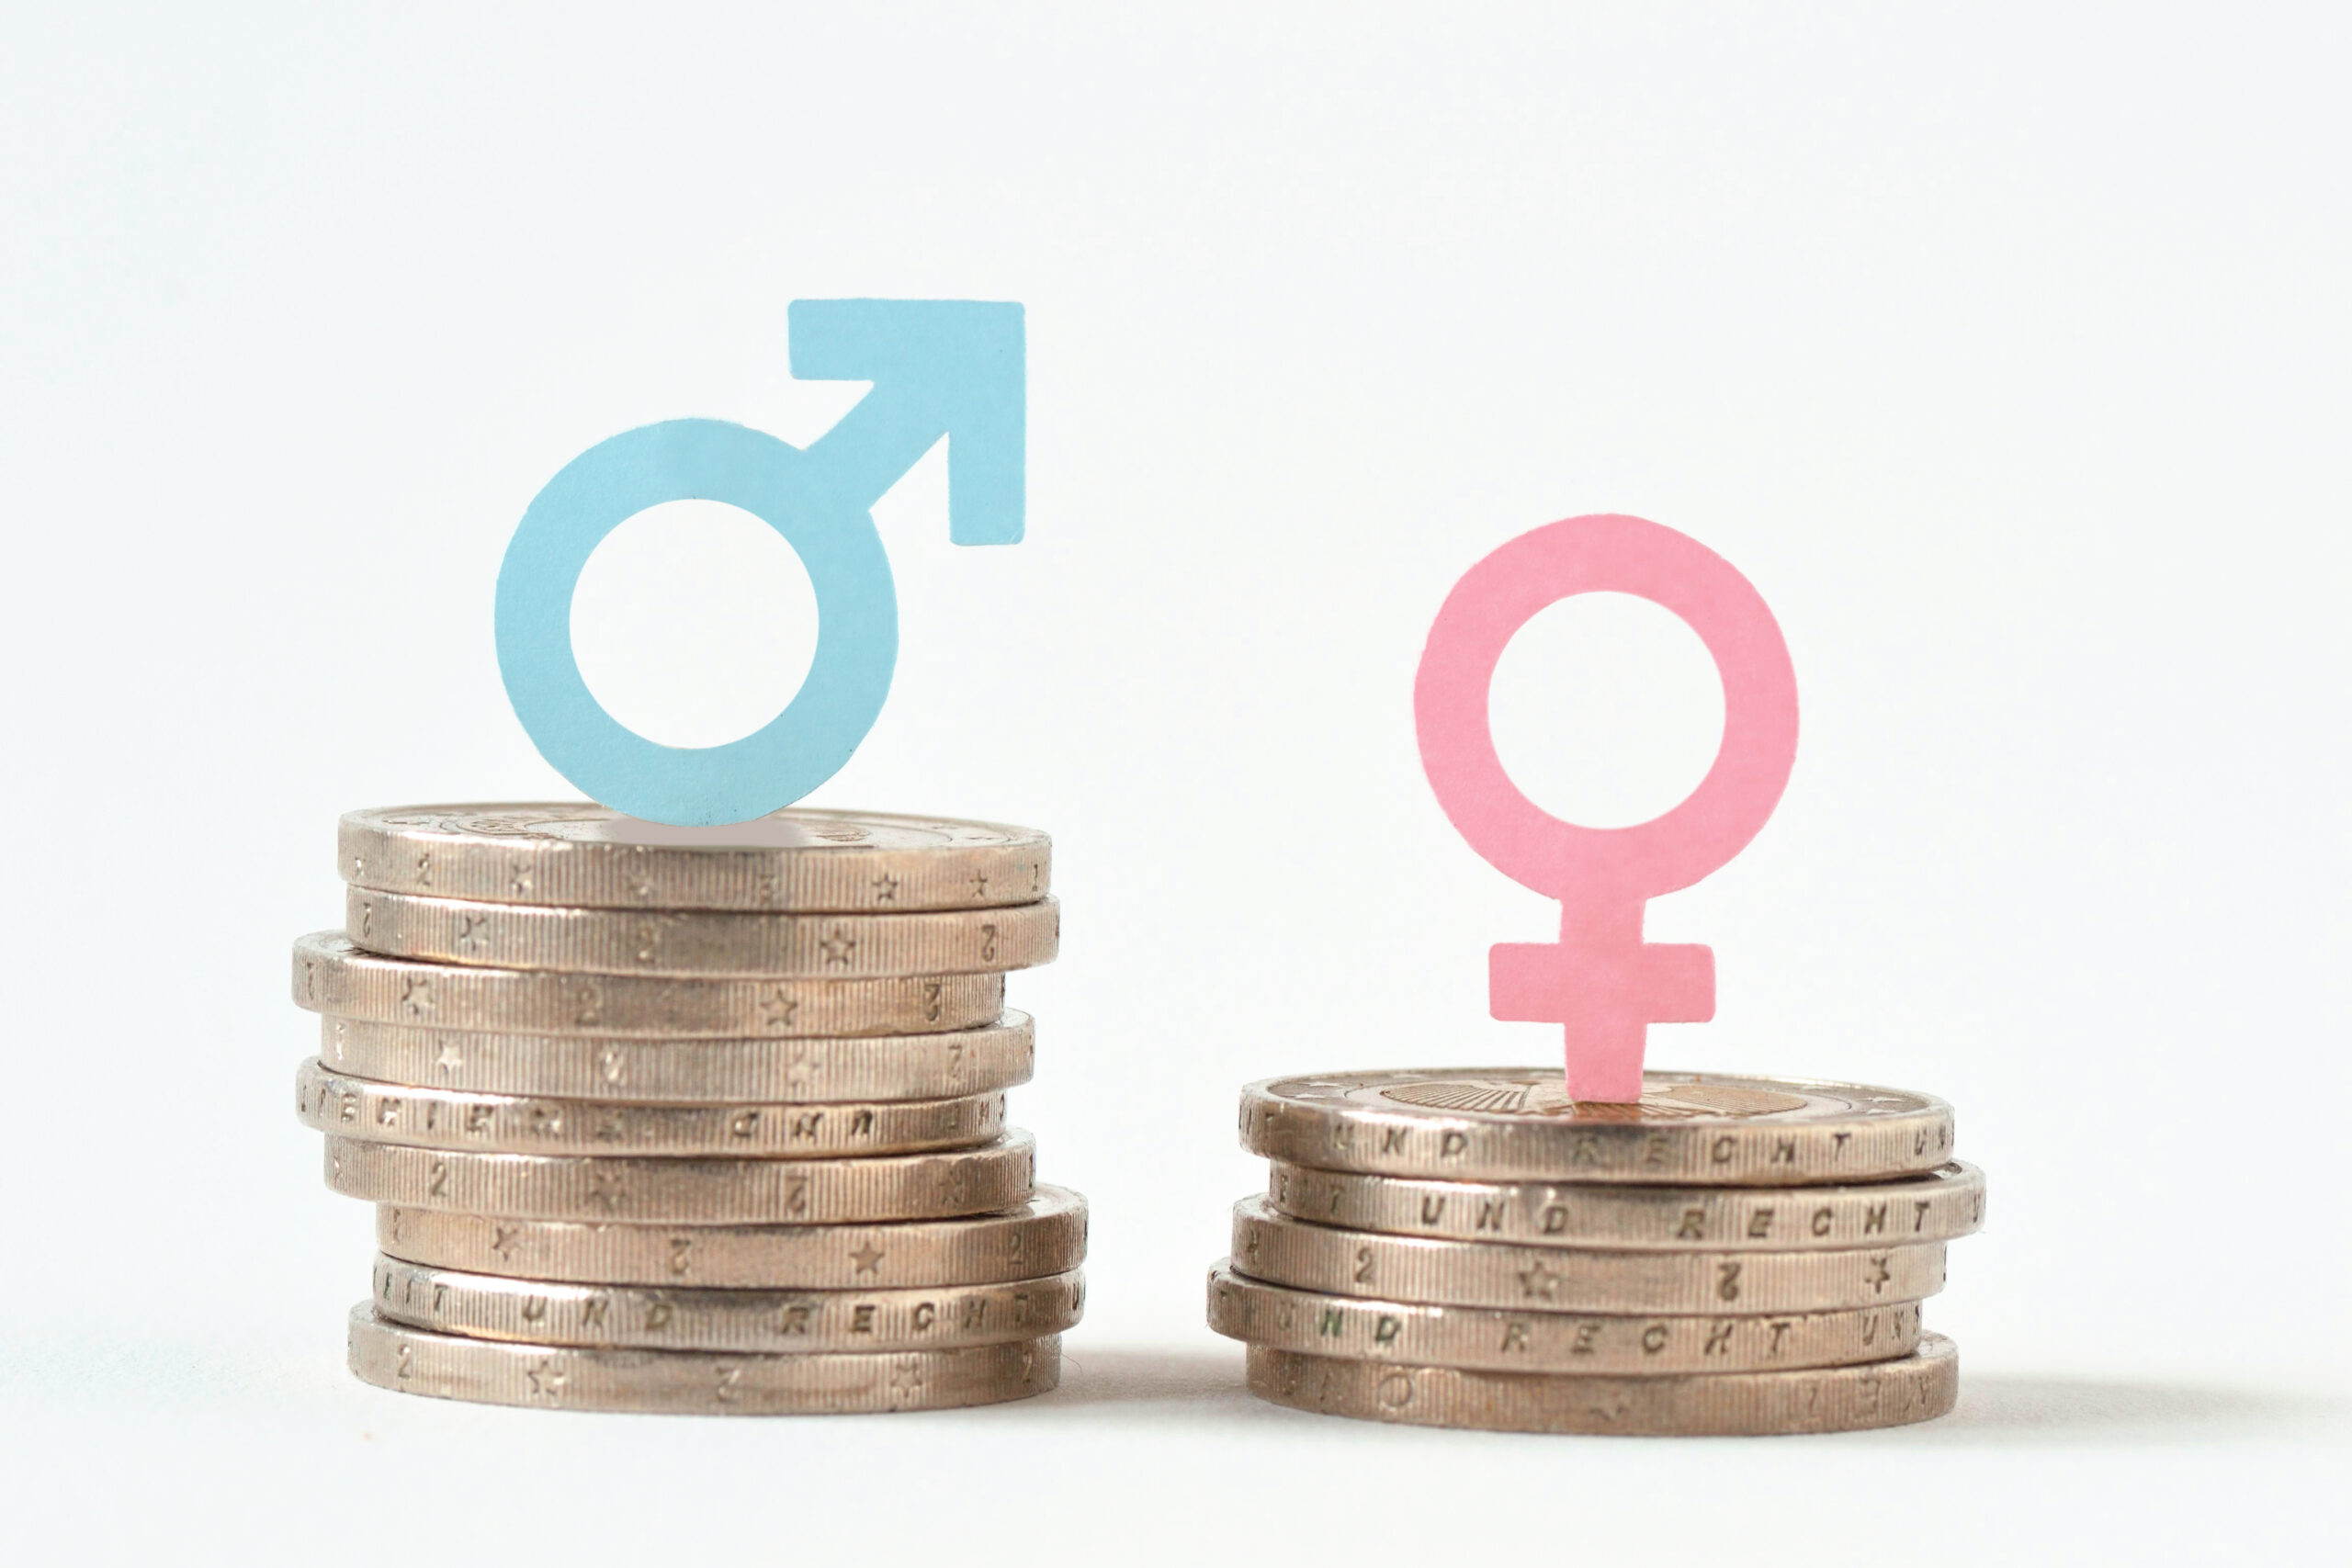 A stack of 10 coins with a blue male gender symbol on top is next to a smaller stack of 5 coins with a pink female gender symbol on top, highlighting the gender pay gap. This disparity underscores the importance of supporting women in business and encouraging innovative business ideas for women.